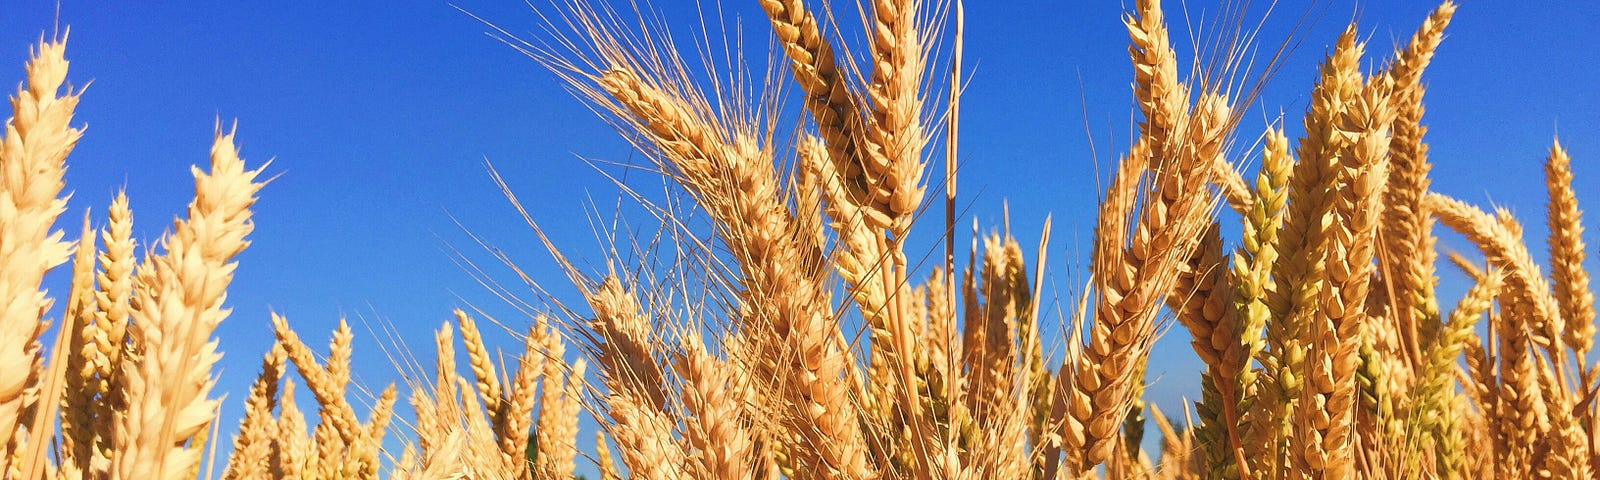 The picture shows golden wheat against an azure sky.